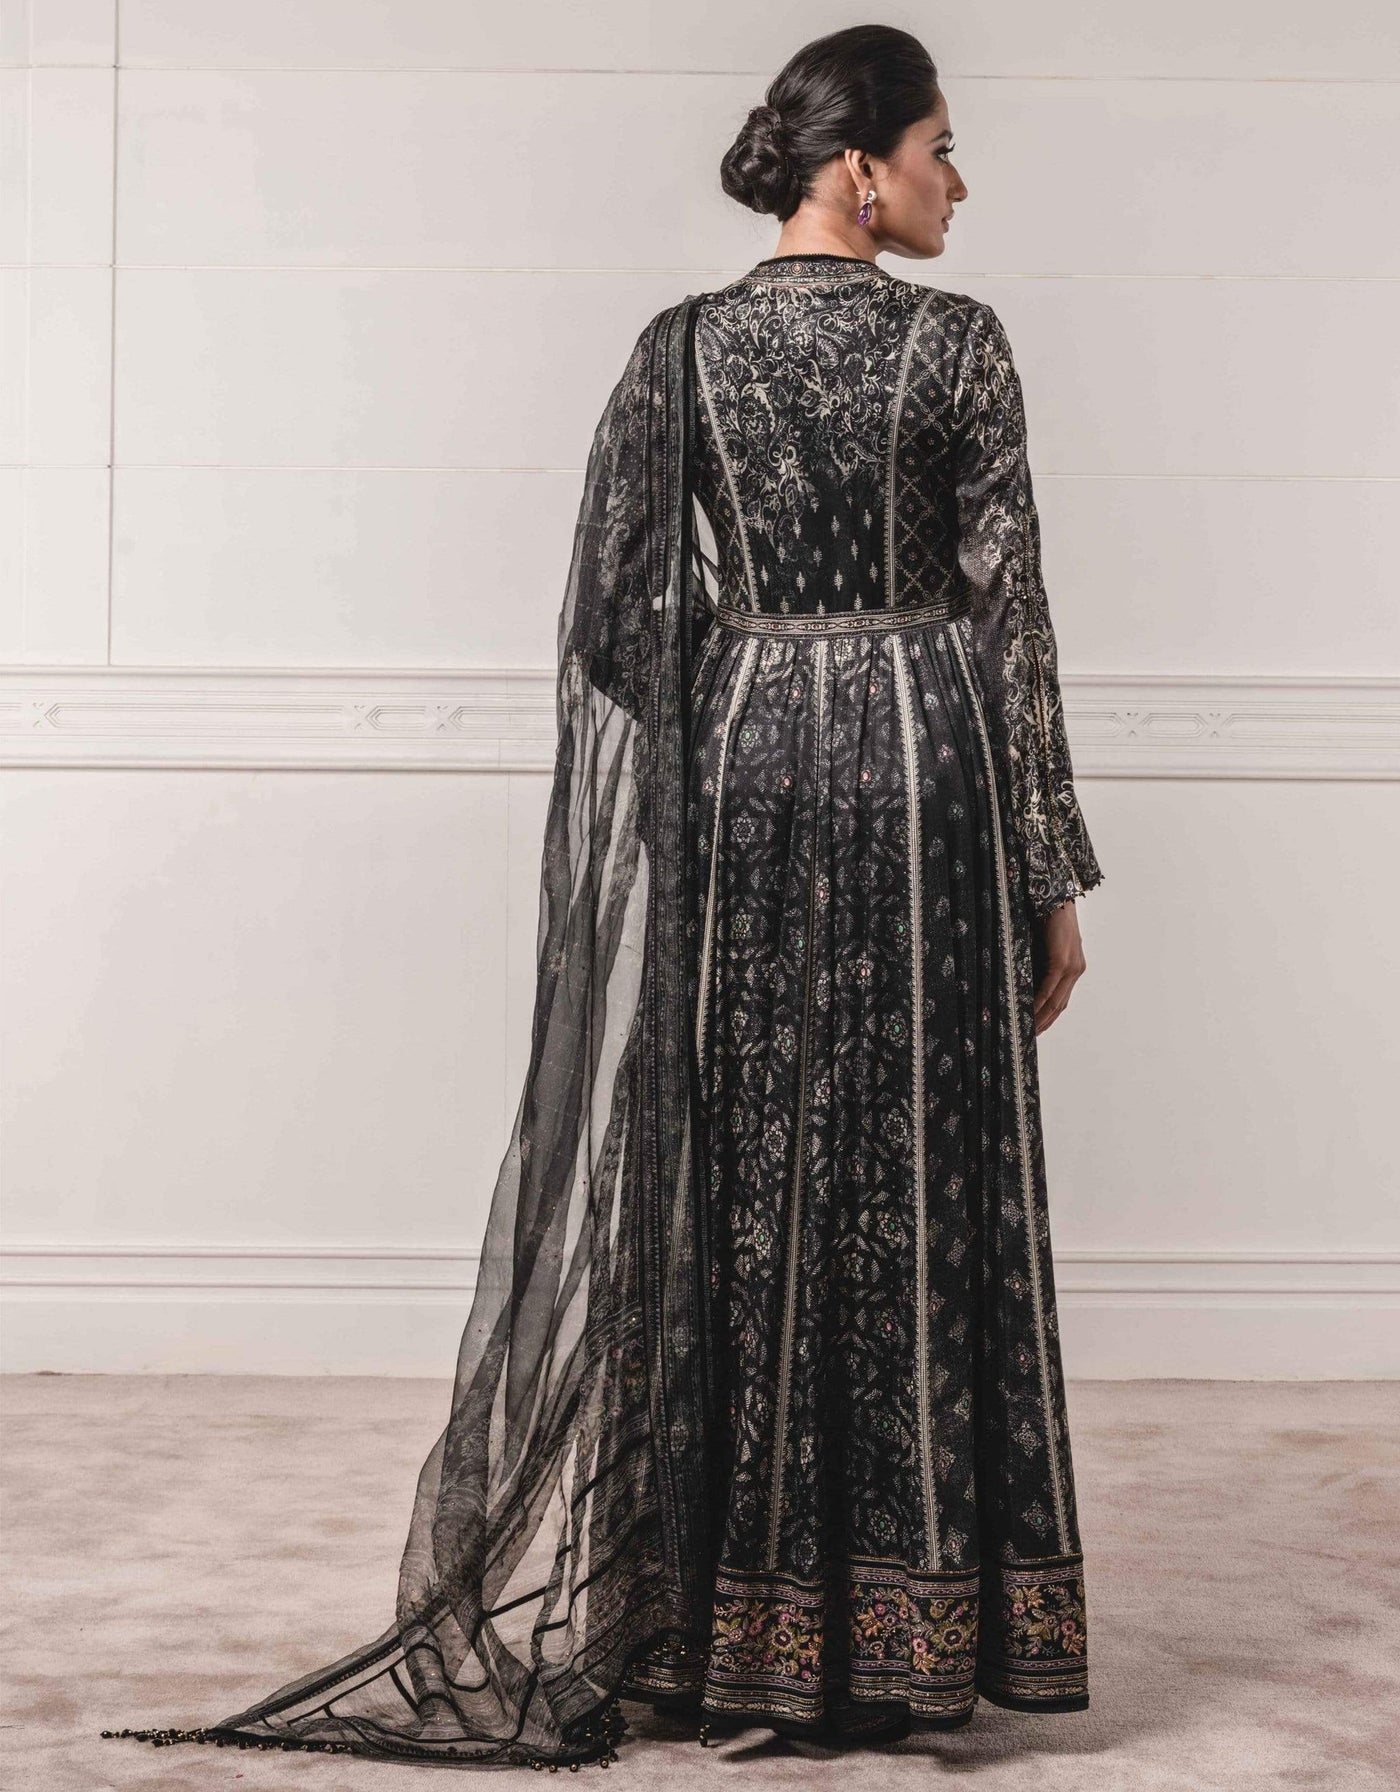 Black Printed Anarkali Set - Indian Clothing in Denver, CO, Aurora, CO, Boulder, CO, Fort Collins, CO, Colorado Springs, CO, Parker, CO, Highlands Ranch, CO, Cherry Creek, CO, Centennial, CO, and Longmont, CO. Nationwide shipping USA - India Fashion X